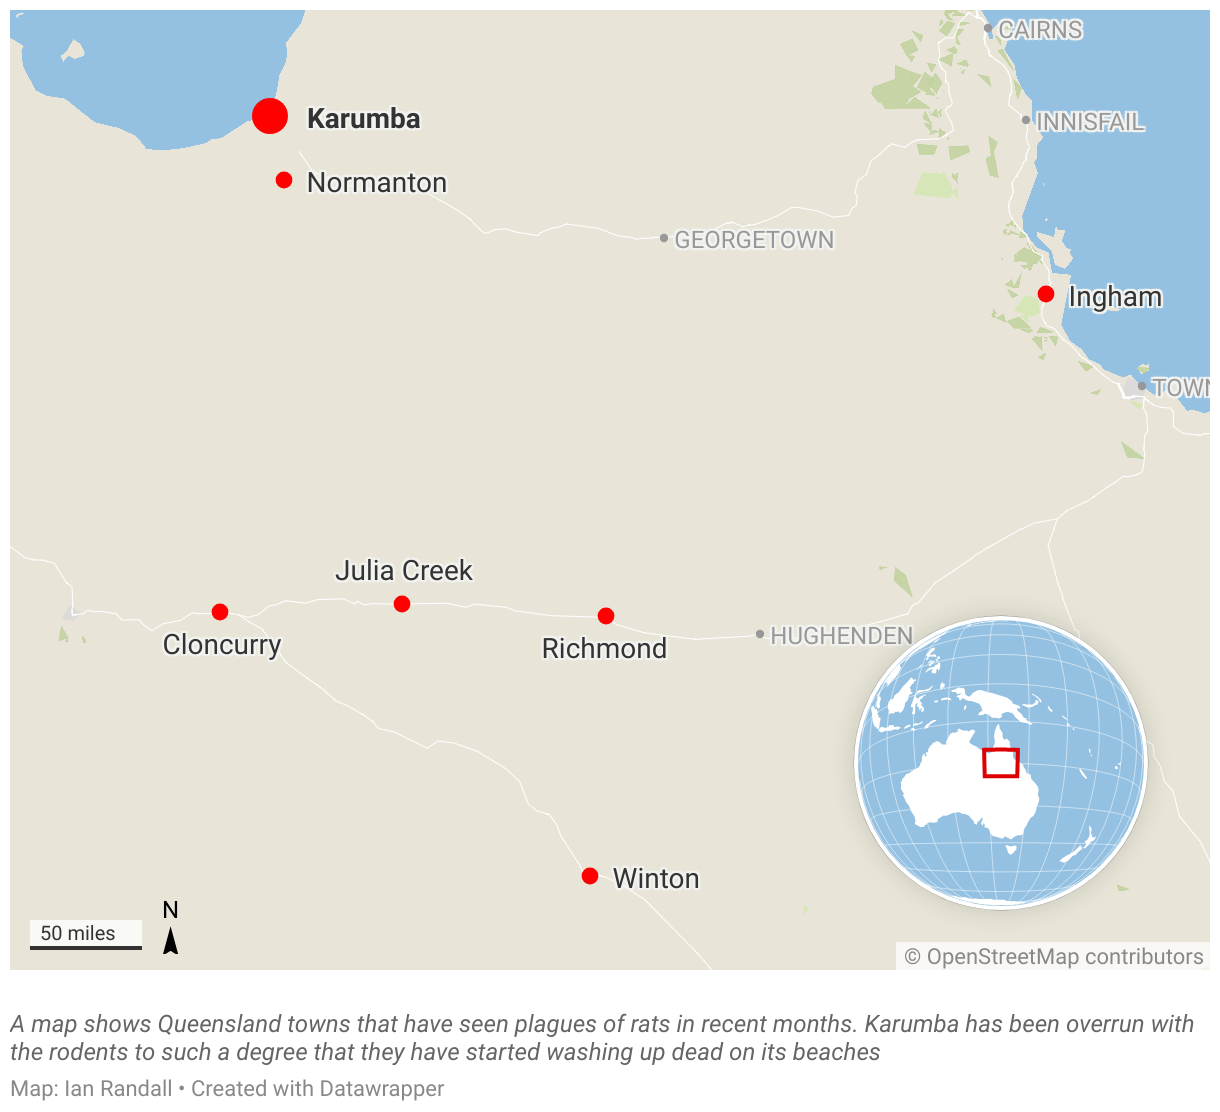 A map of Queensland towns that have seen plagues of rats in recent months.